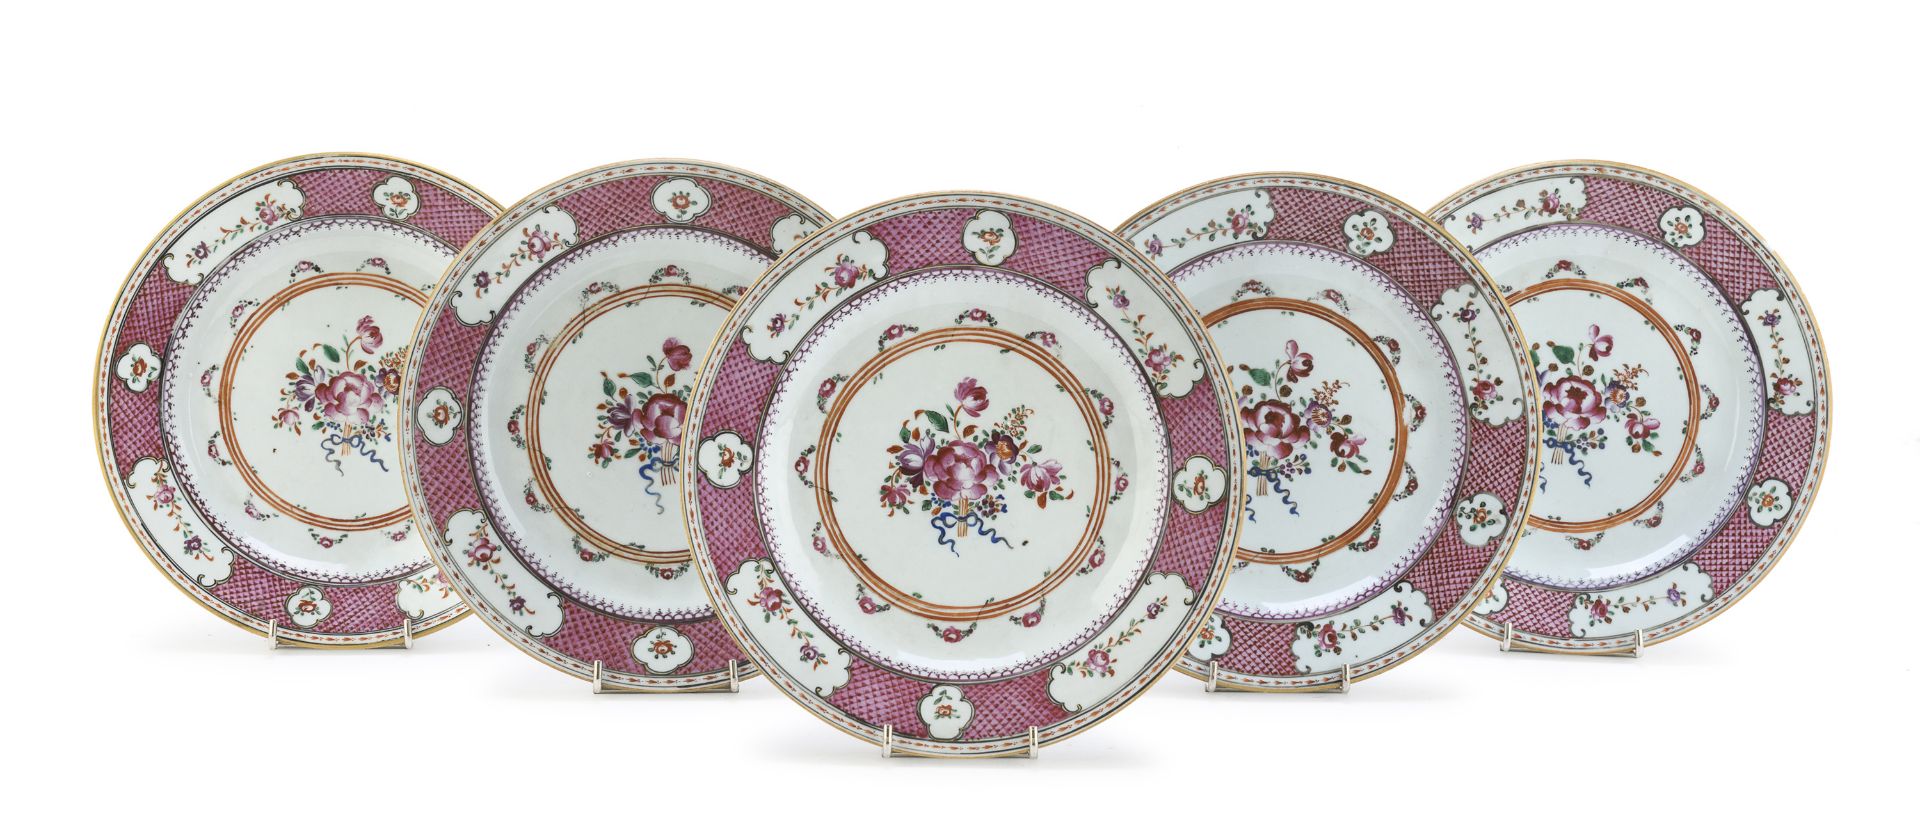 FIVE PORCELAIN DISHES PROBABLY FRANCE EARLY 19TH CENTURY